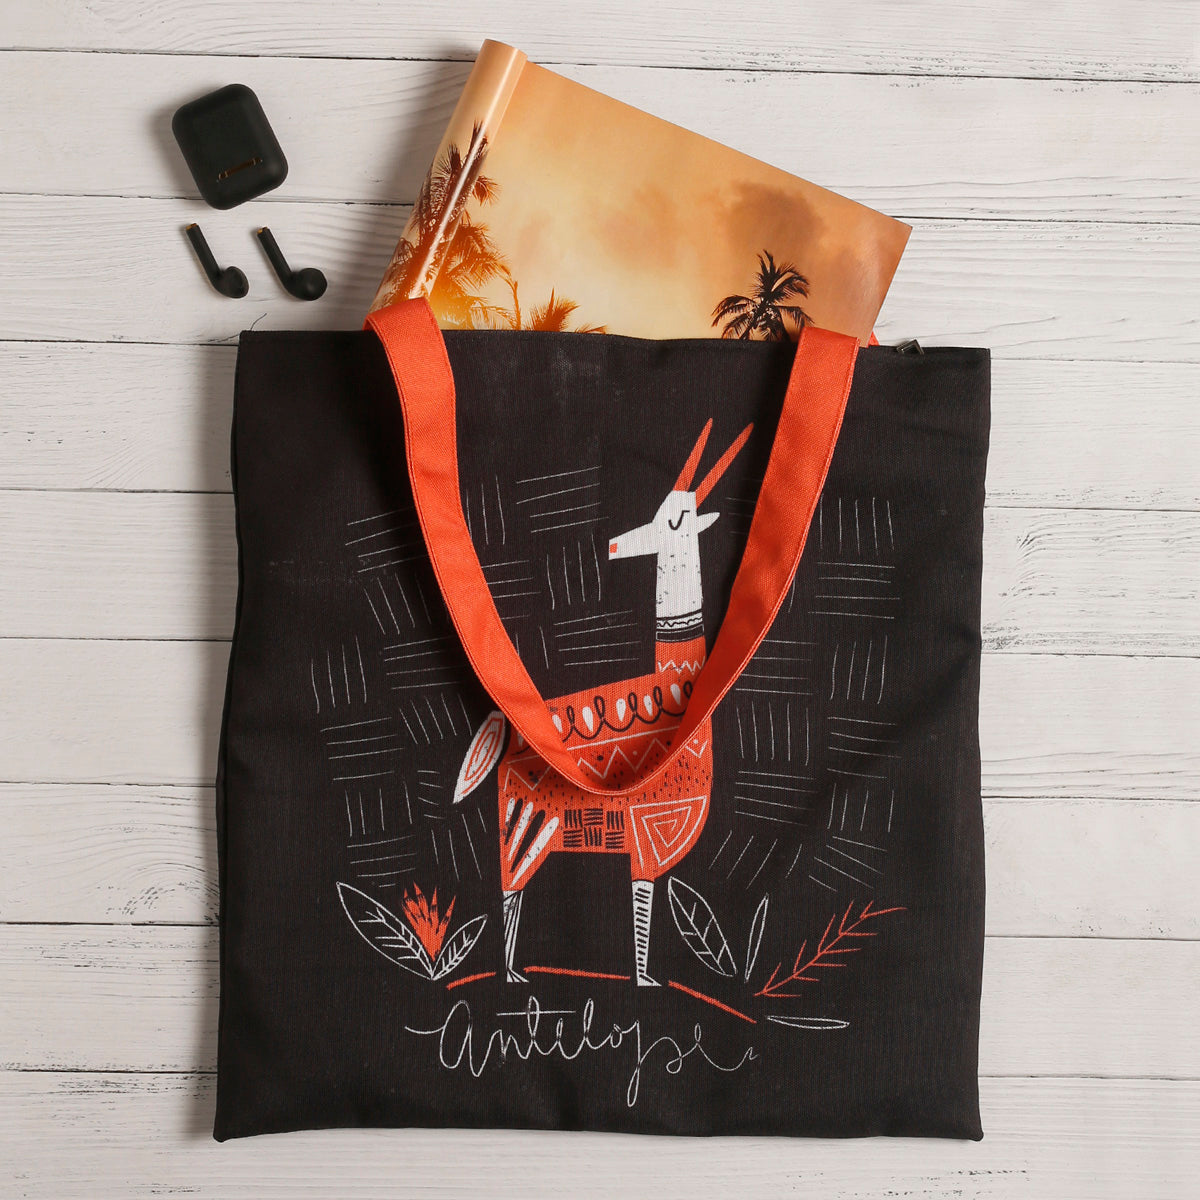 Black tote bag with orange handles and tribal print design featuring a deer, plants.  A pair of wireless earbuds and a charging case are placed beside it, along with a notebook with a sunset and palm tree cover peeking out from the bag. The items are on a white wooden surface.